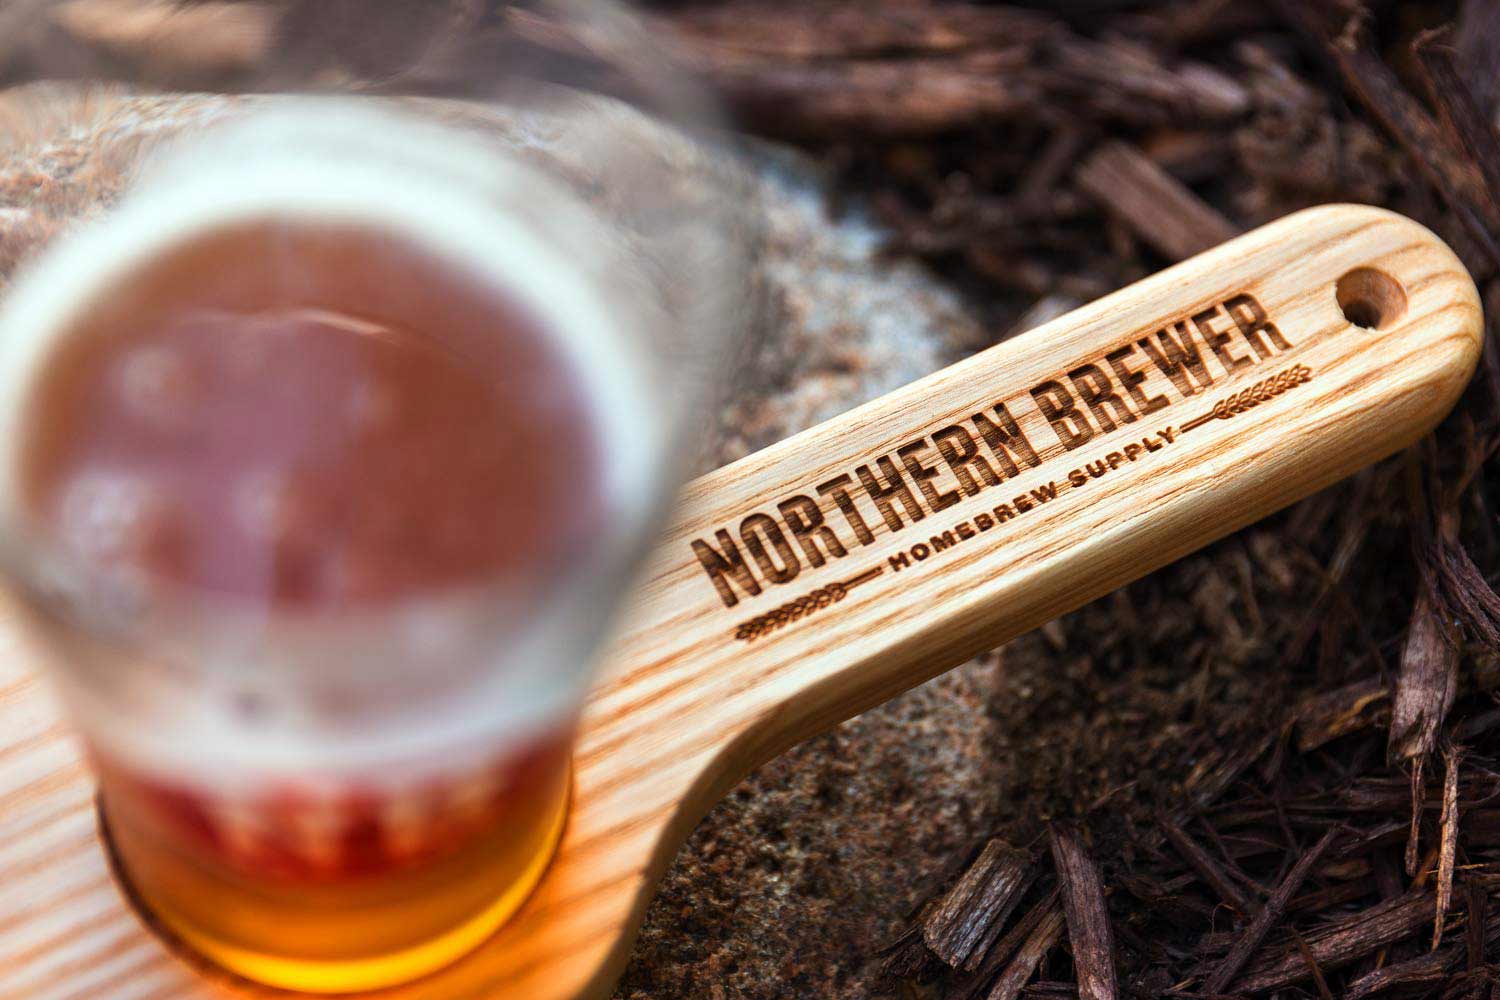 Northern Brewer Homebrew Supply on a serving board